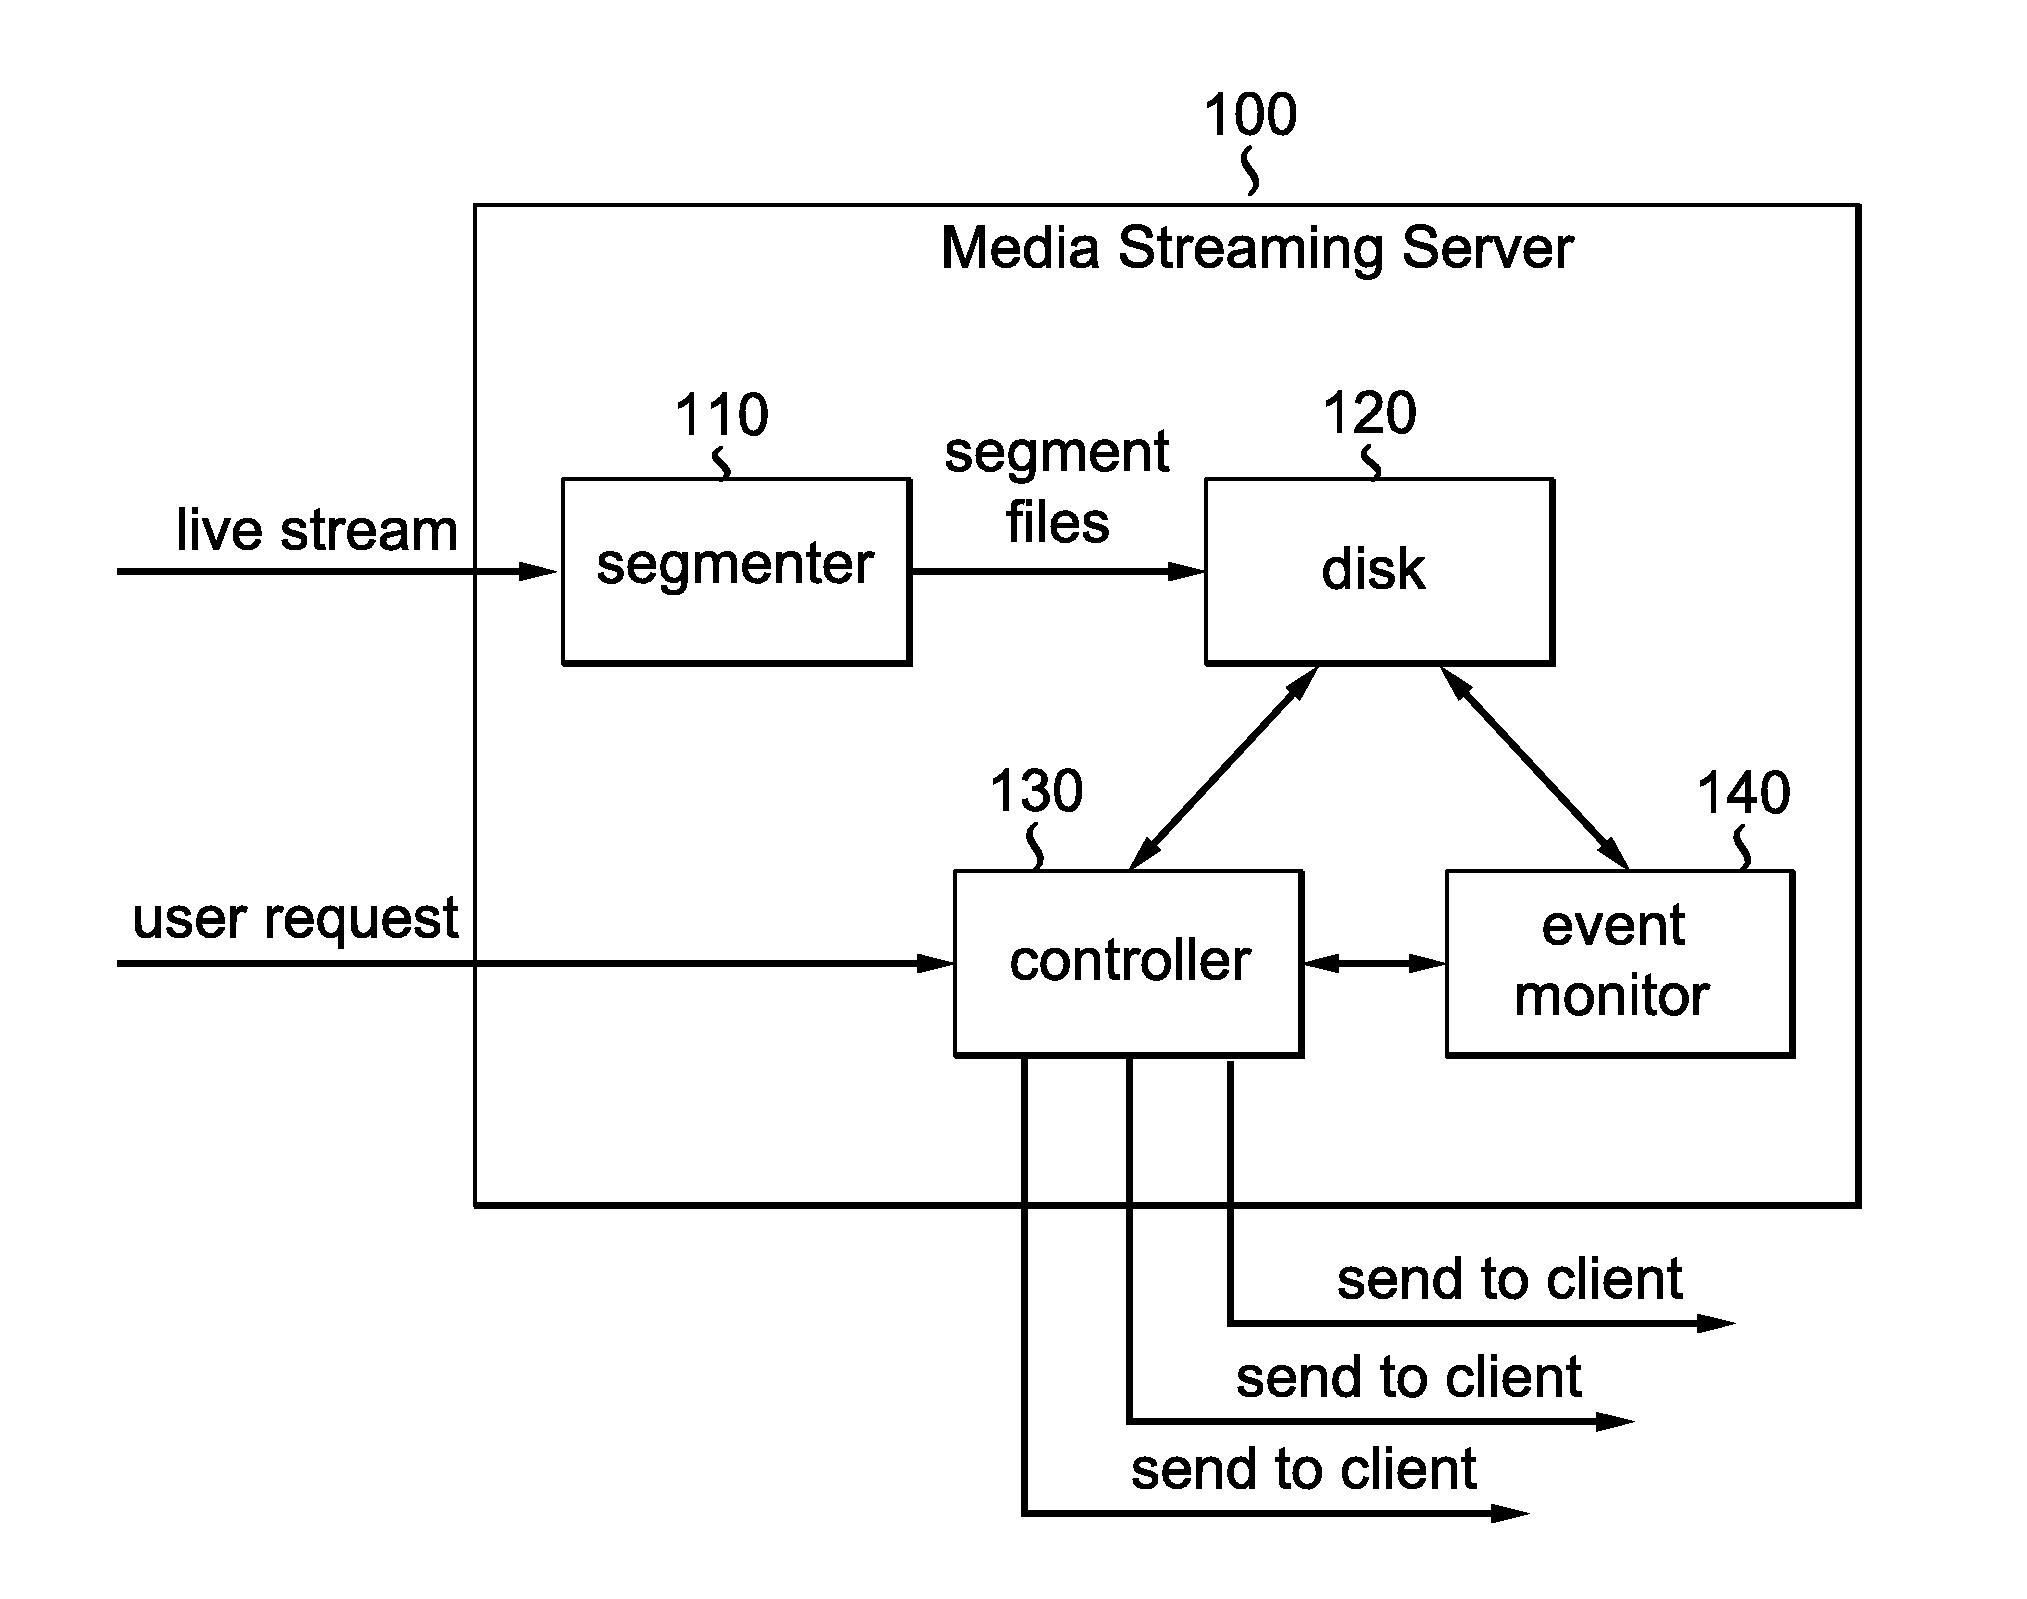 Apparatus and method for transmitting live media content